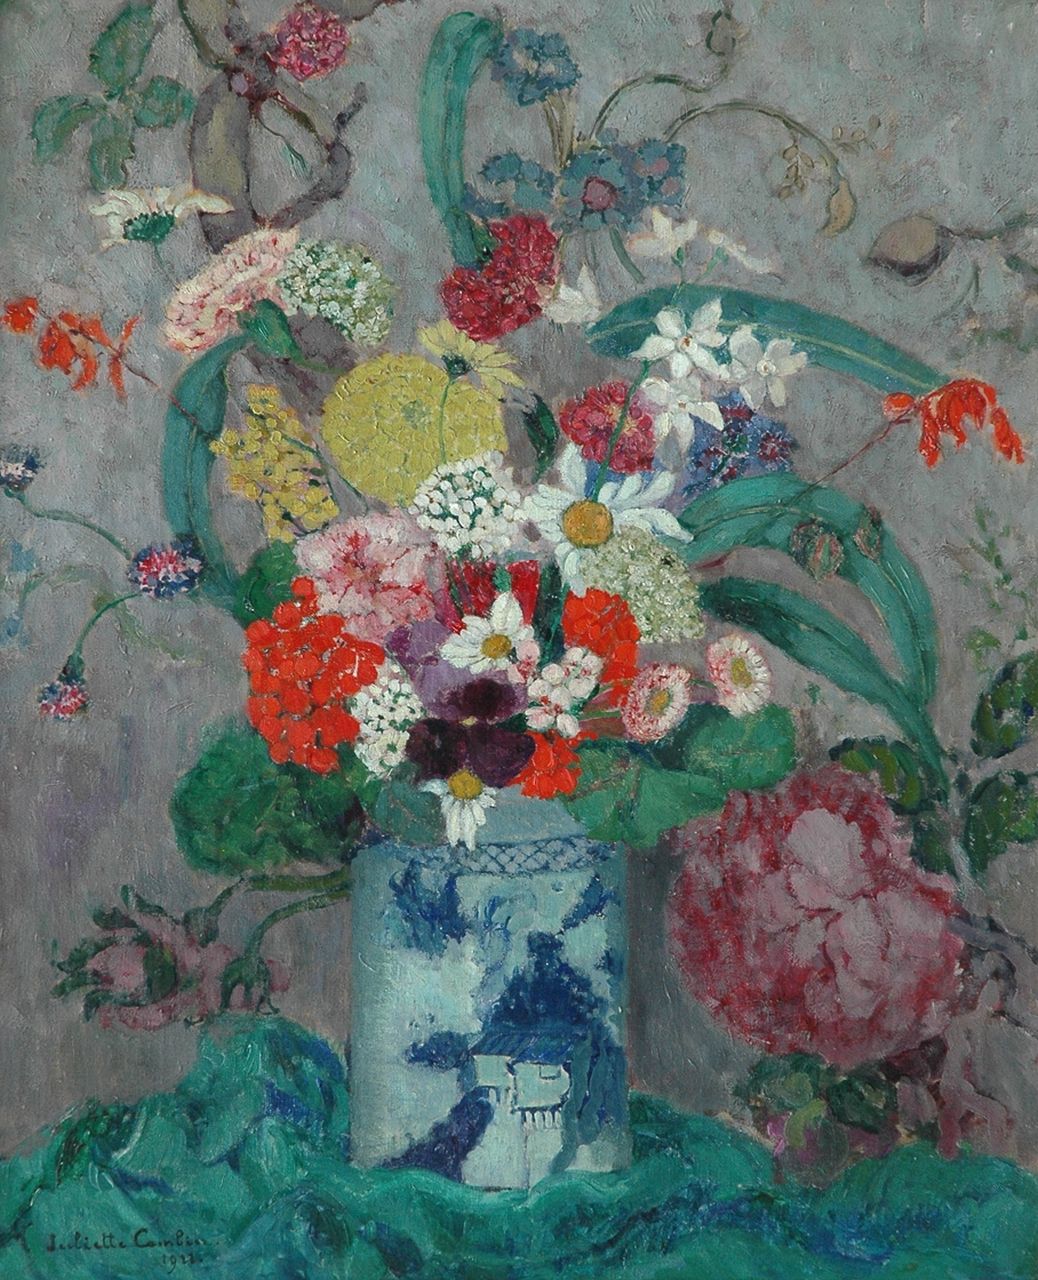 Cambier J.Z.  | 'Juliette' Ziane Cambier, A still life of flowers, oil on canvas 61.5 x 50.5 cm, signed l.l. and datd 1933